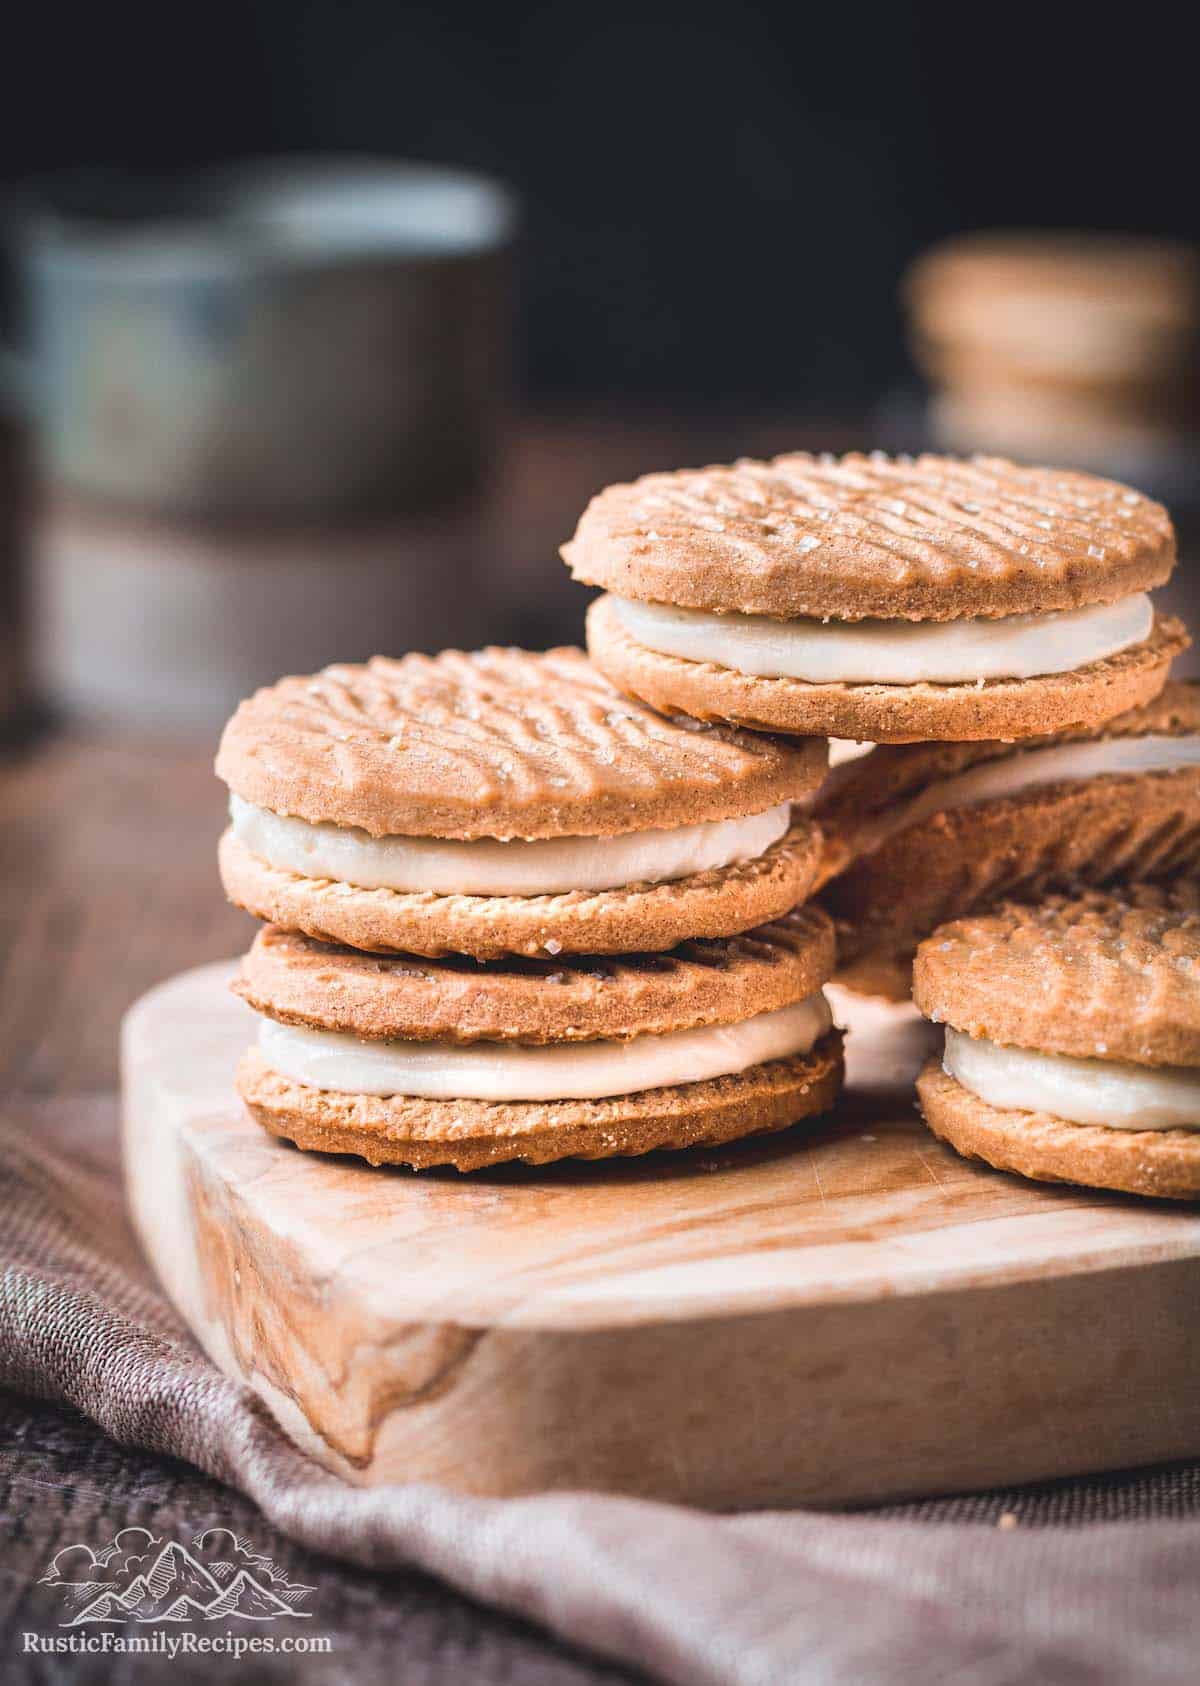 Biscoff sandwich cookies stacked on a wooden board.